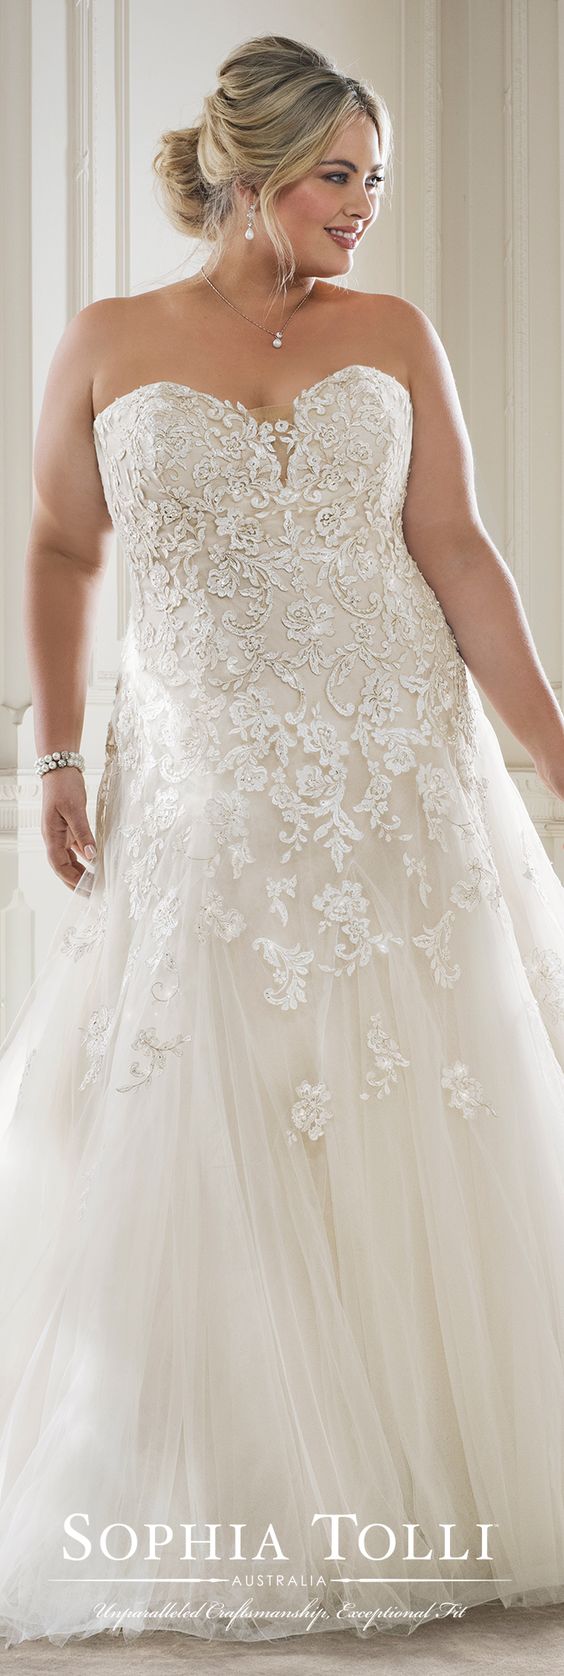 The ultimate guide to plus-size wedding dress shopping